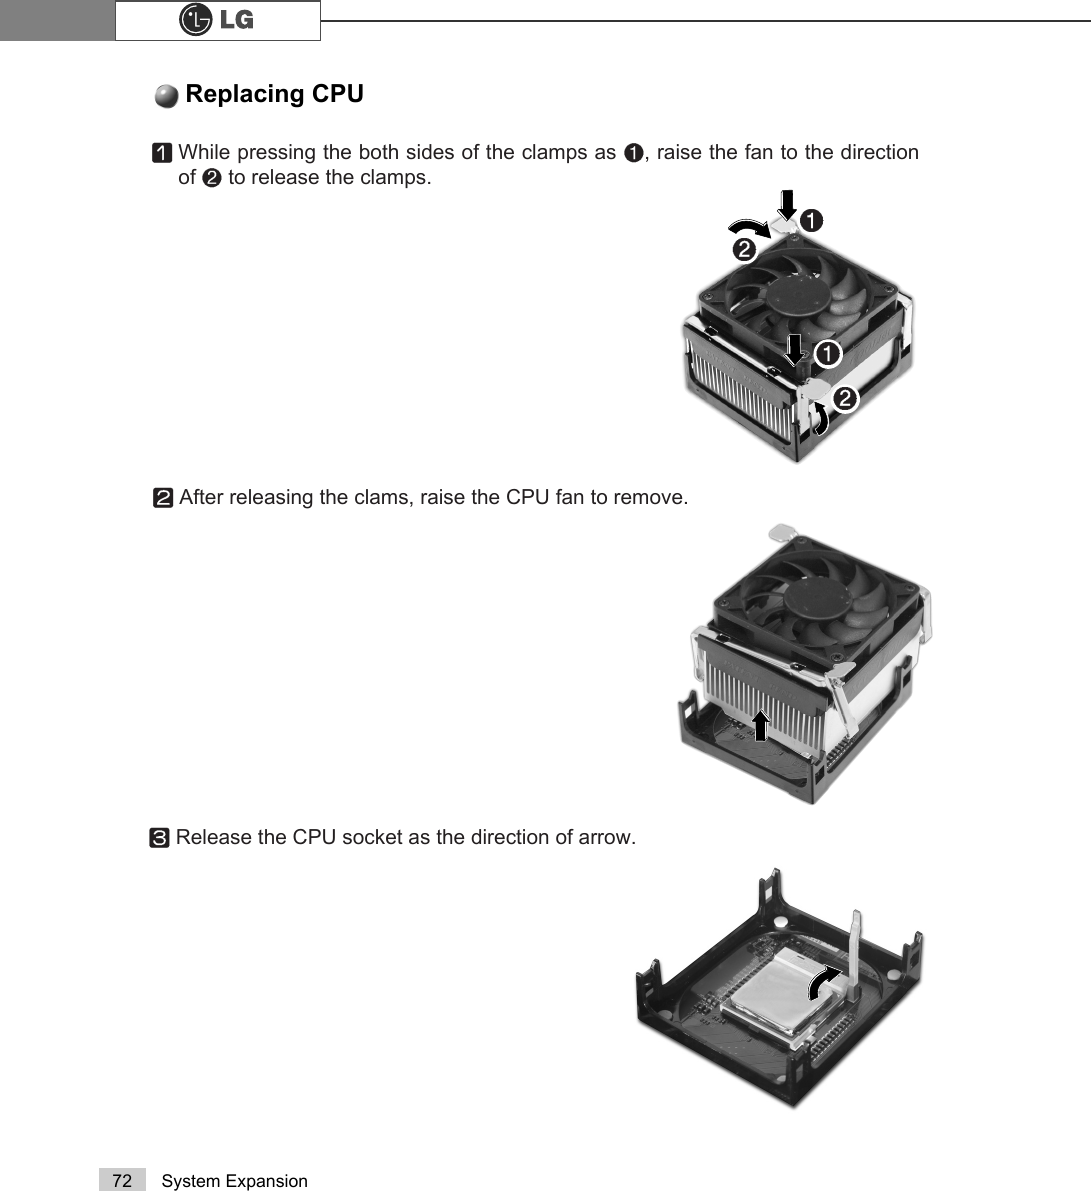 72 System ExpansionReplacing CPU ⓞWhile pressing the both sides of the clamps as ℘, raise the fan to the directionof ℙto release the clamps.ⓟAfter releasing the clams, raise the CPU fan to remove.ⓠRelease the CPU socket as the direction of arrow.℘ℙ℘ℙ